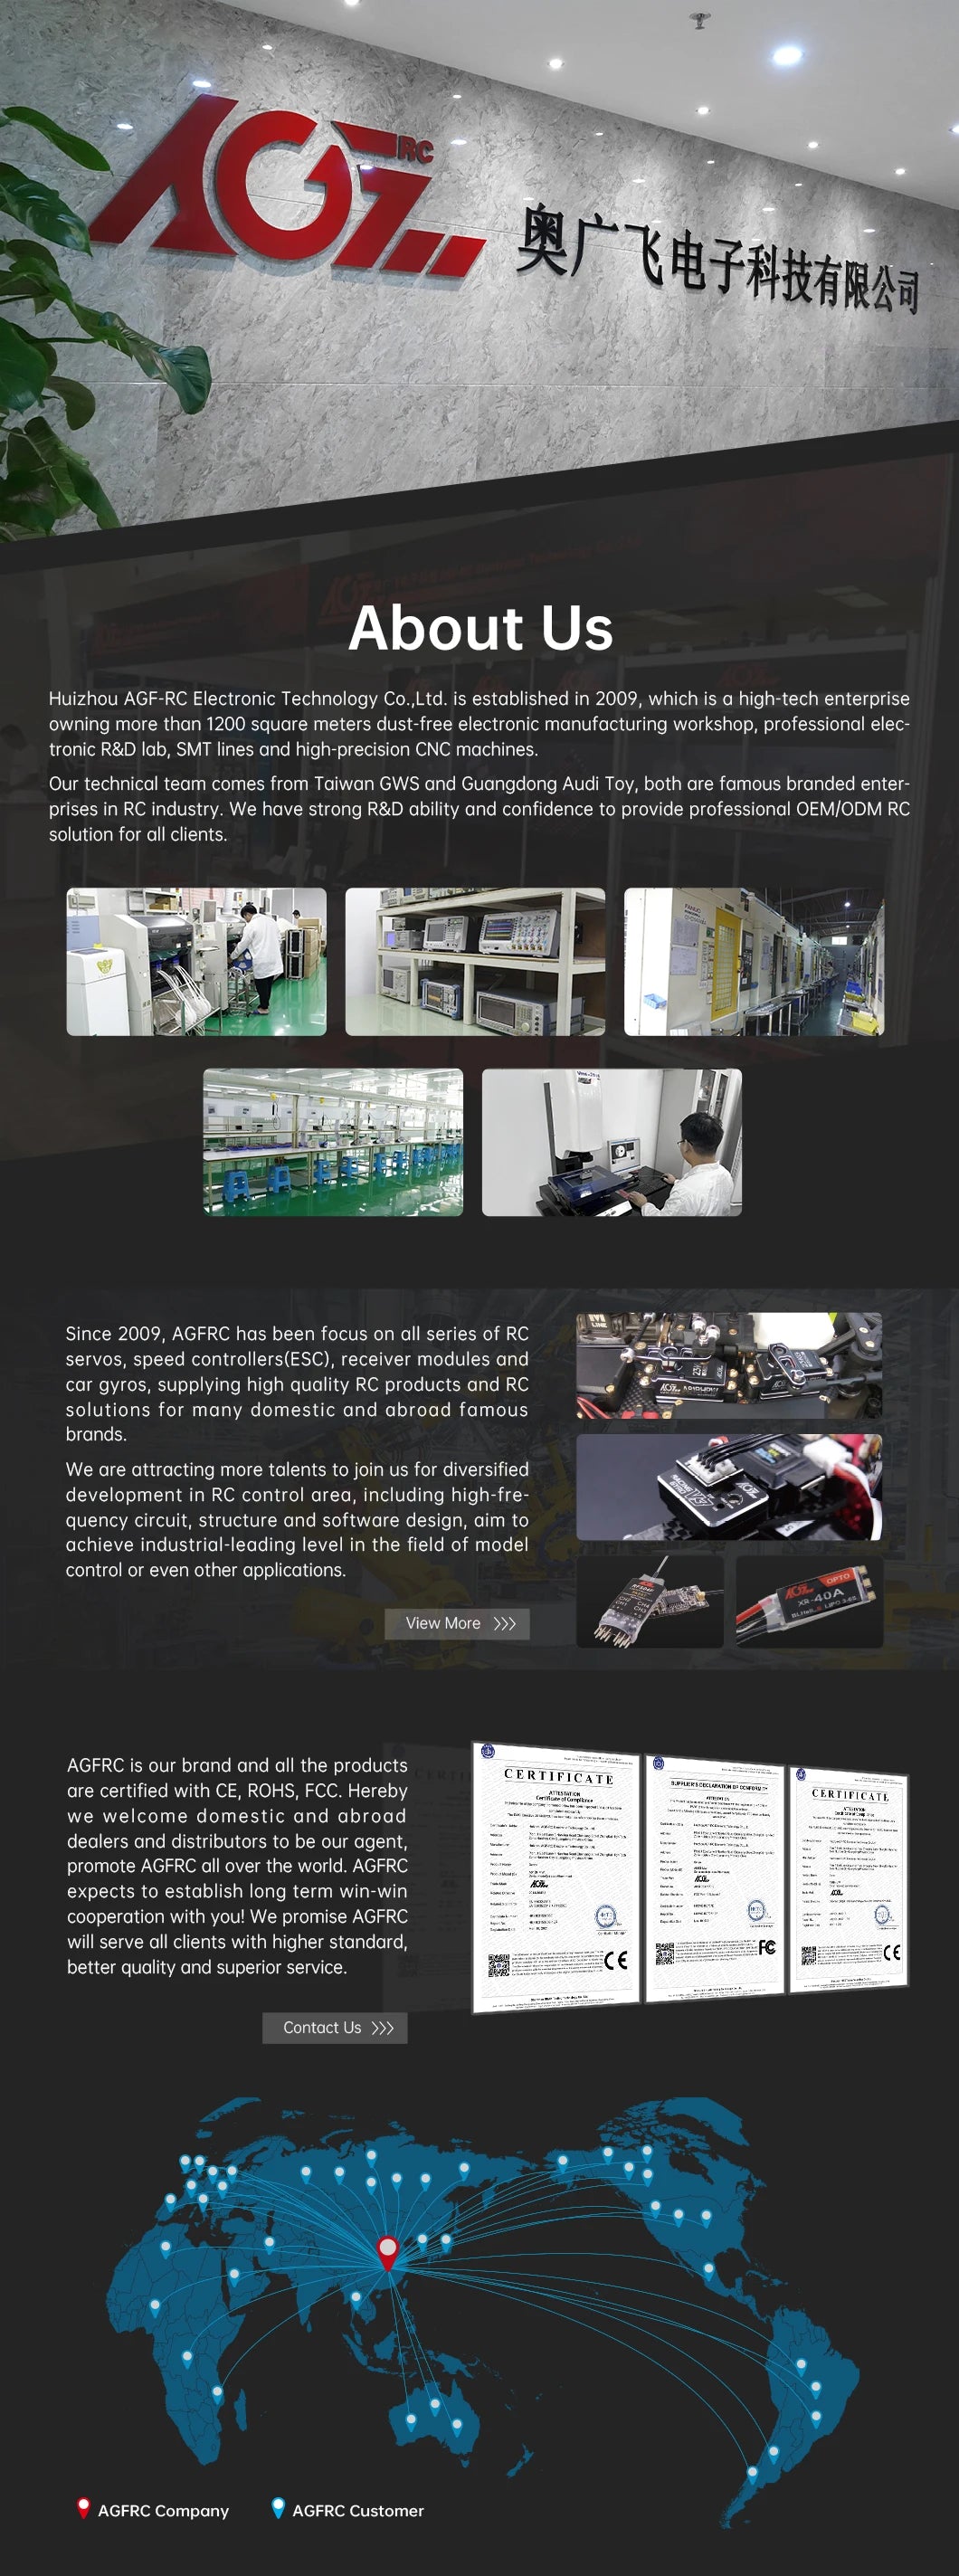 AGFRC A11CLS V3 Anniversary Edition, Huizhou AGF-RC Electronic Technology Co-,Ltd. is a